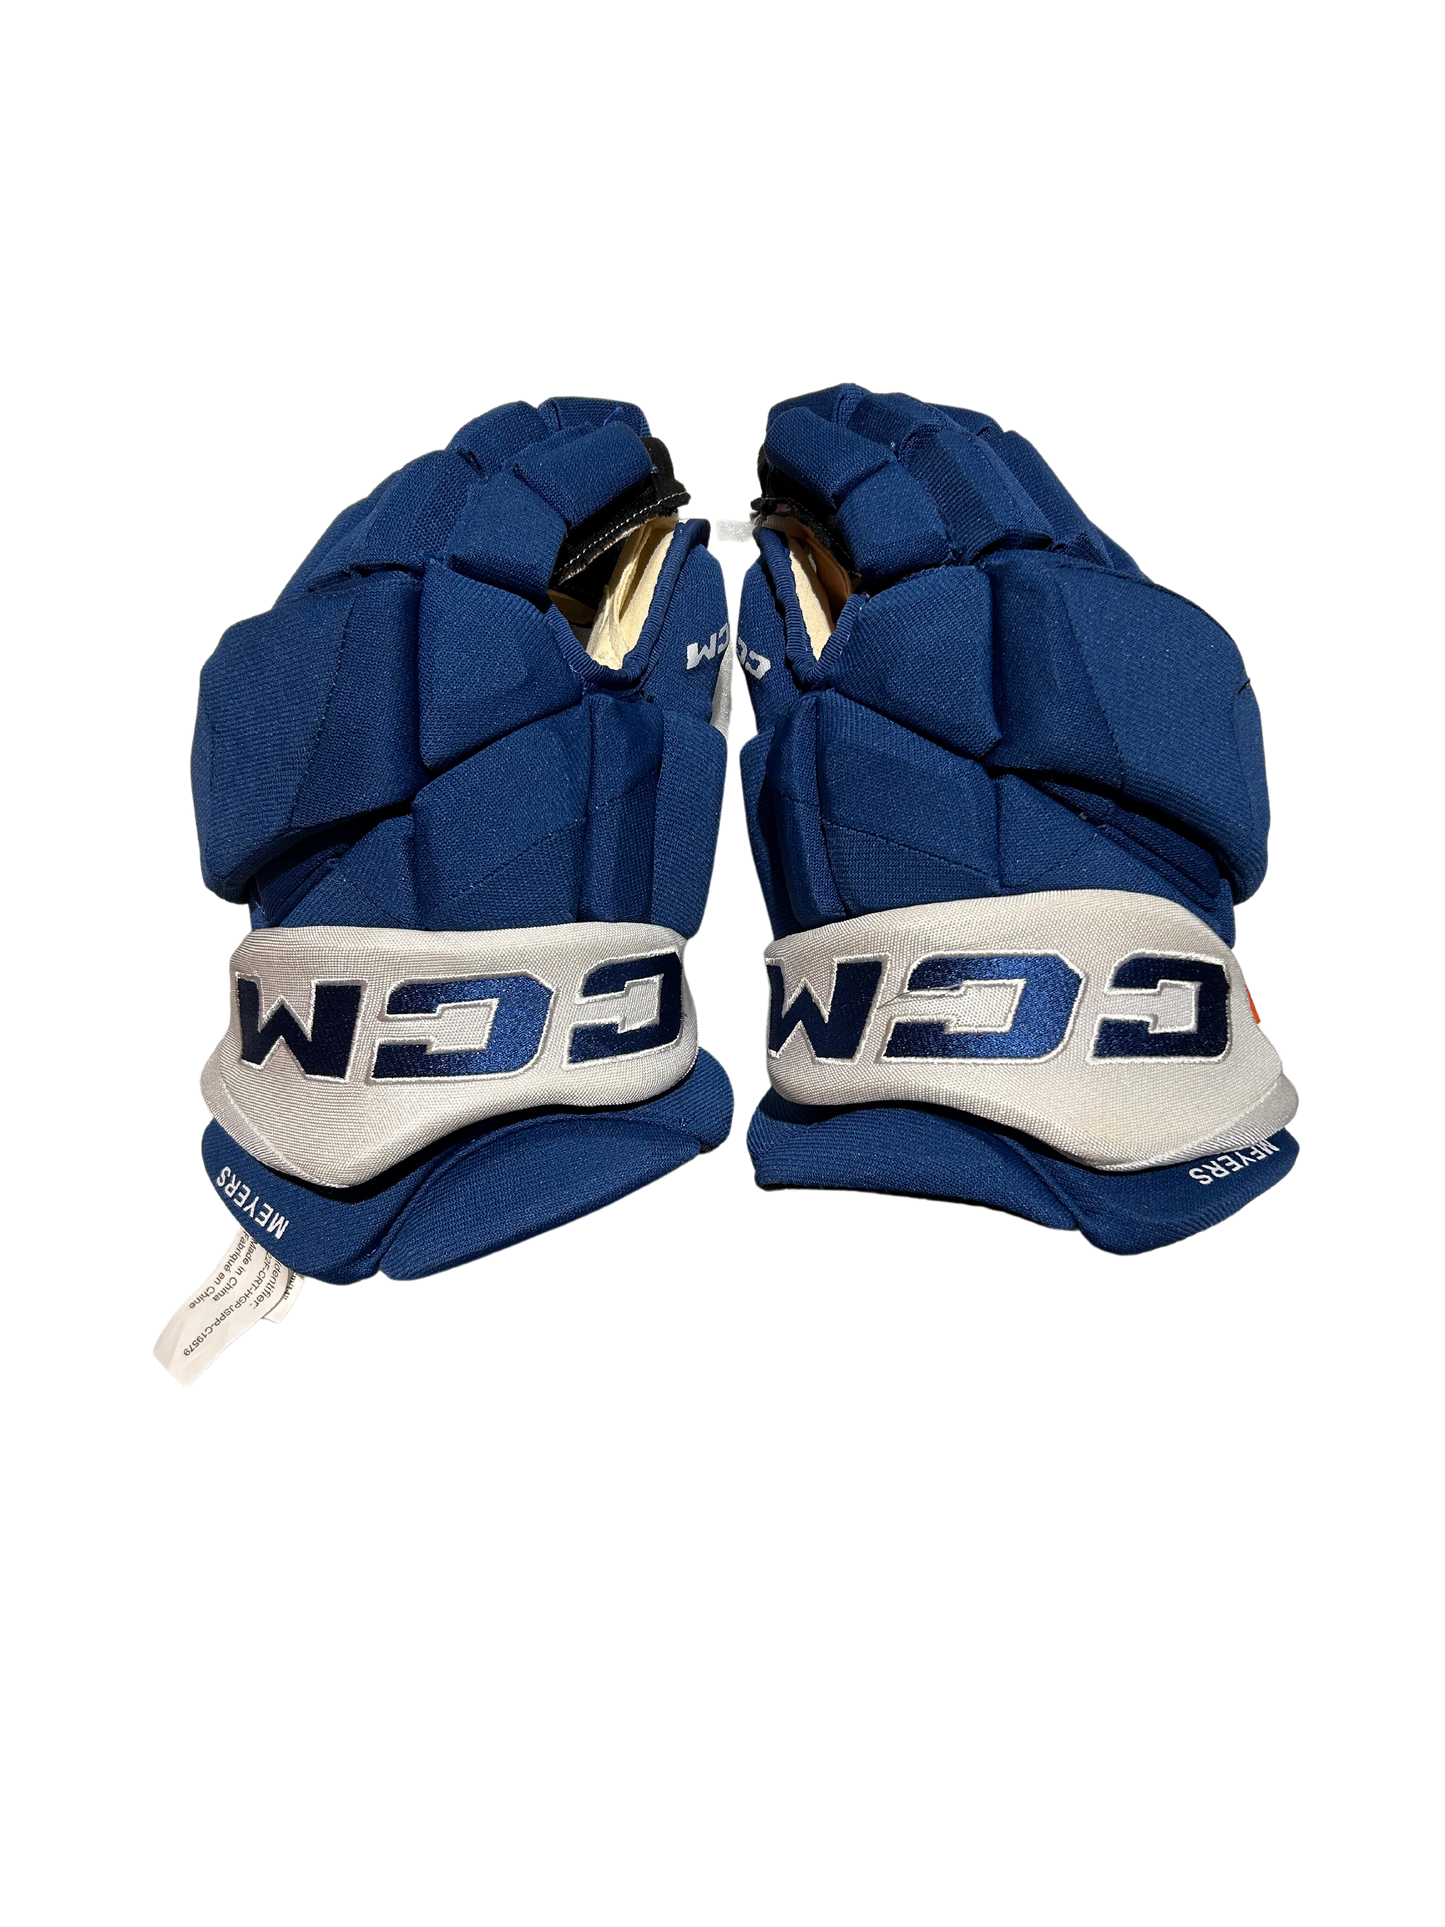 New Blue Colorado Avalanche CCM 14" Jetspeed Gloves (Multiple Players)